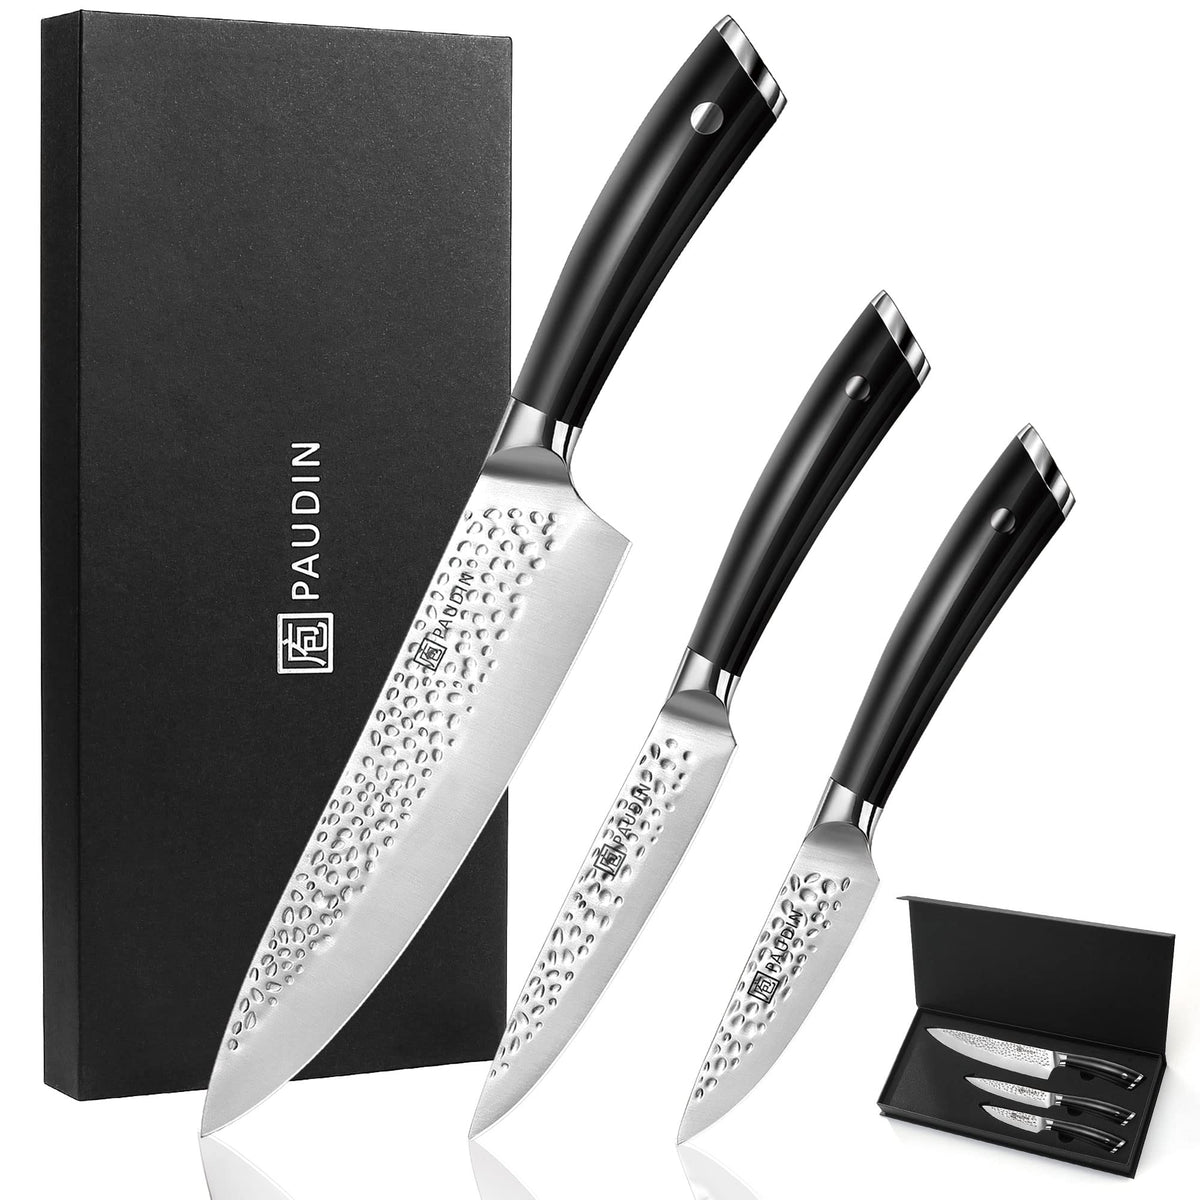 Paudin HS3 Hammered Pattern Premium 5Cr15Mov Chef Knives Set